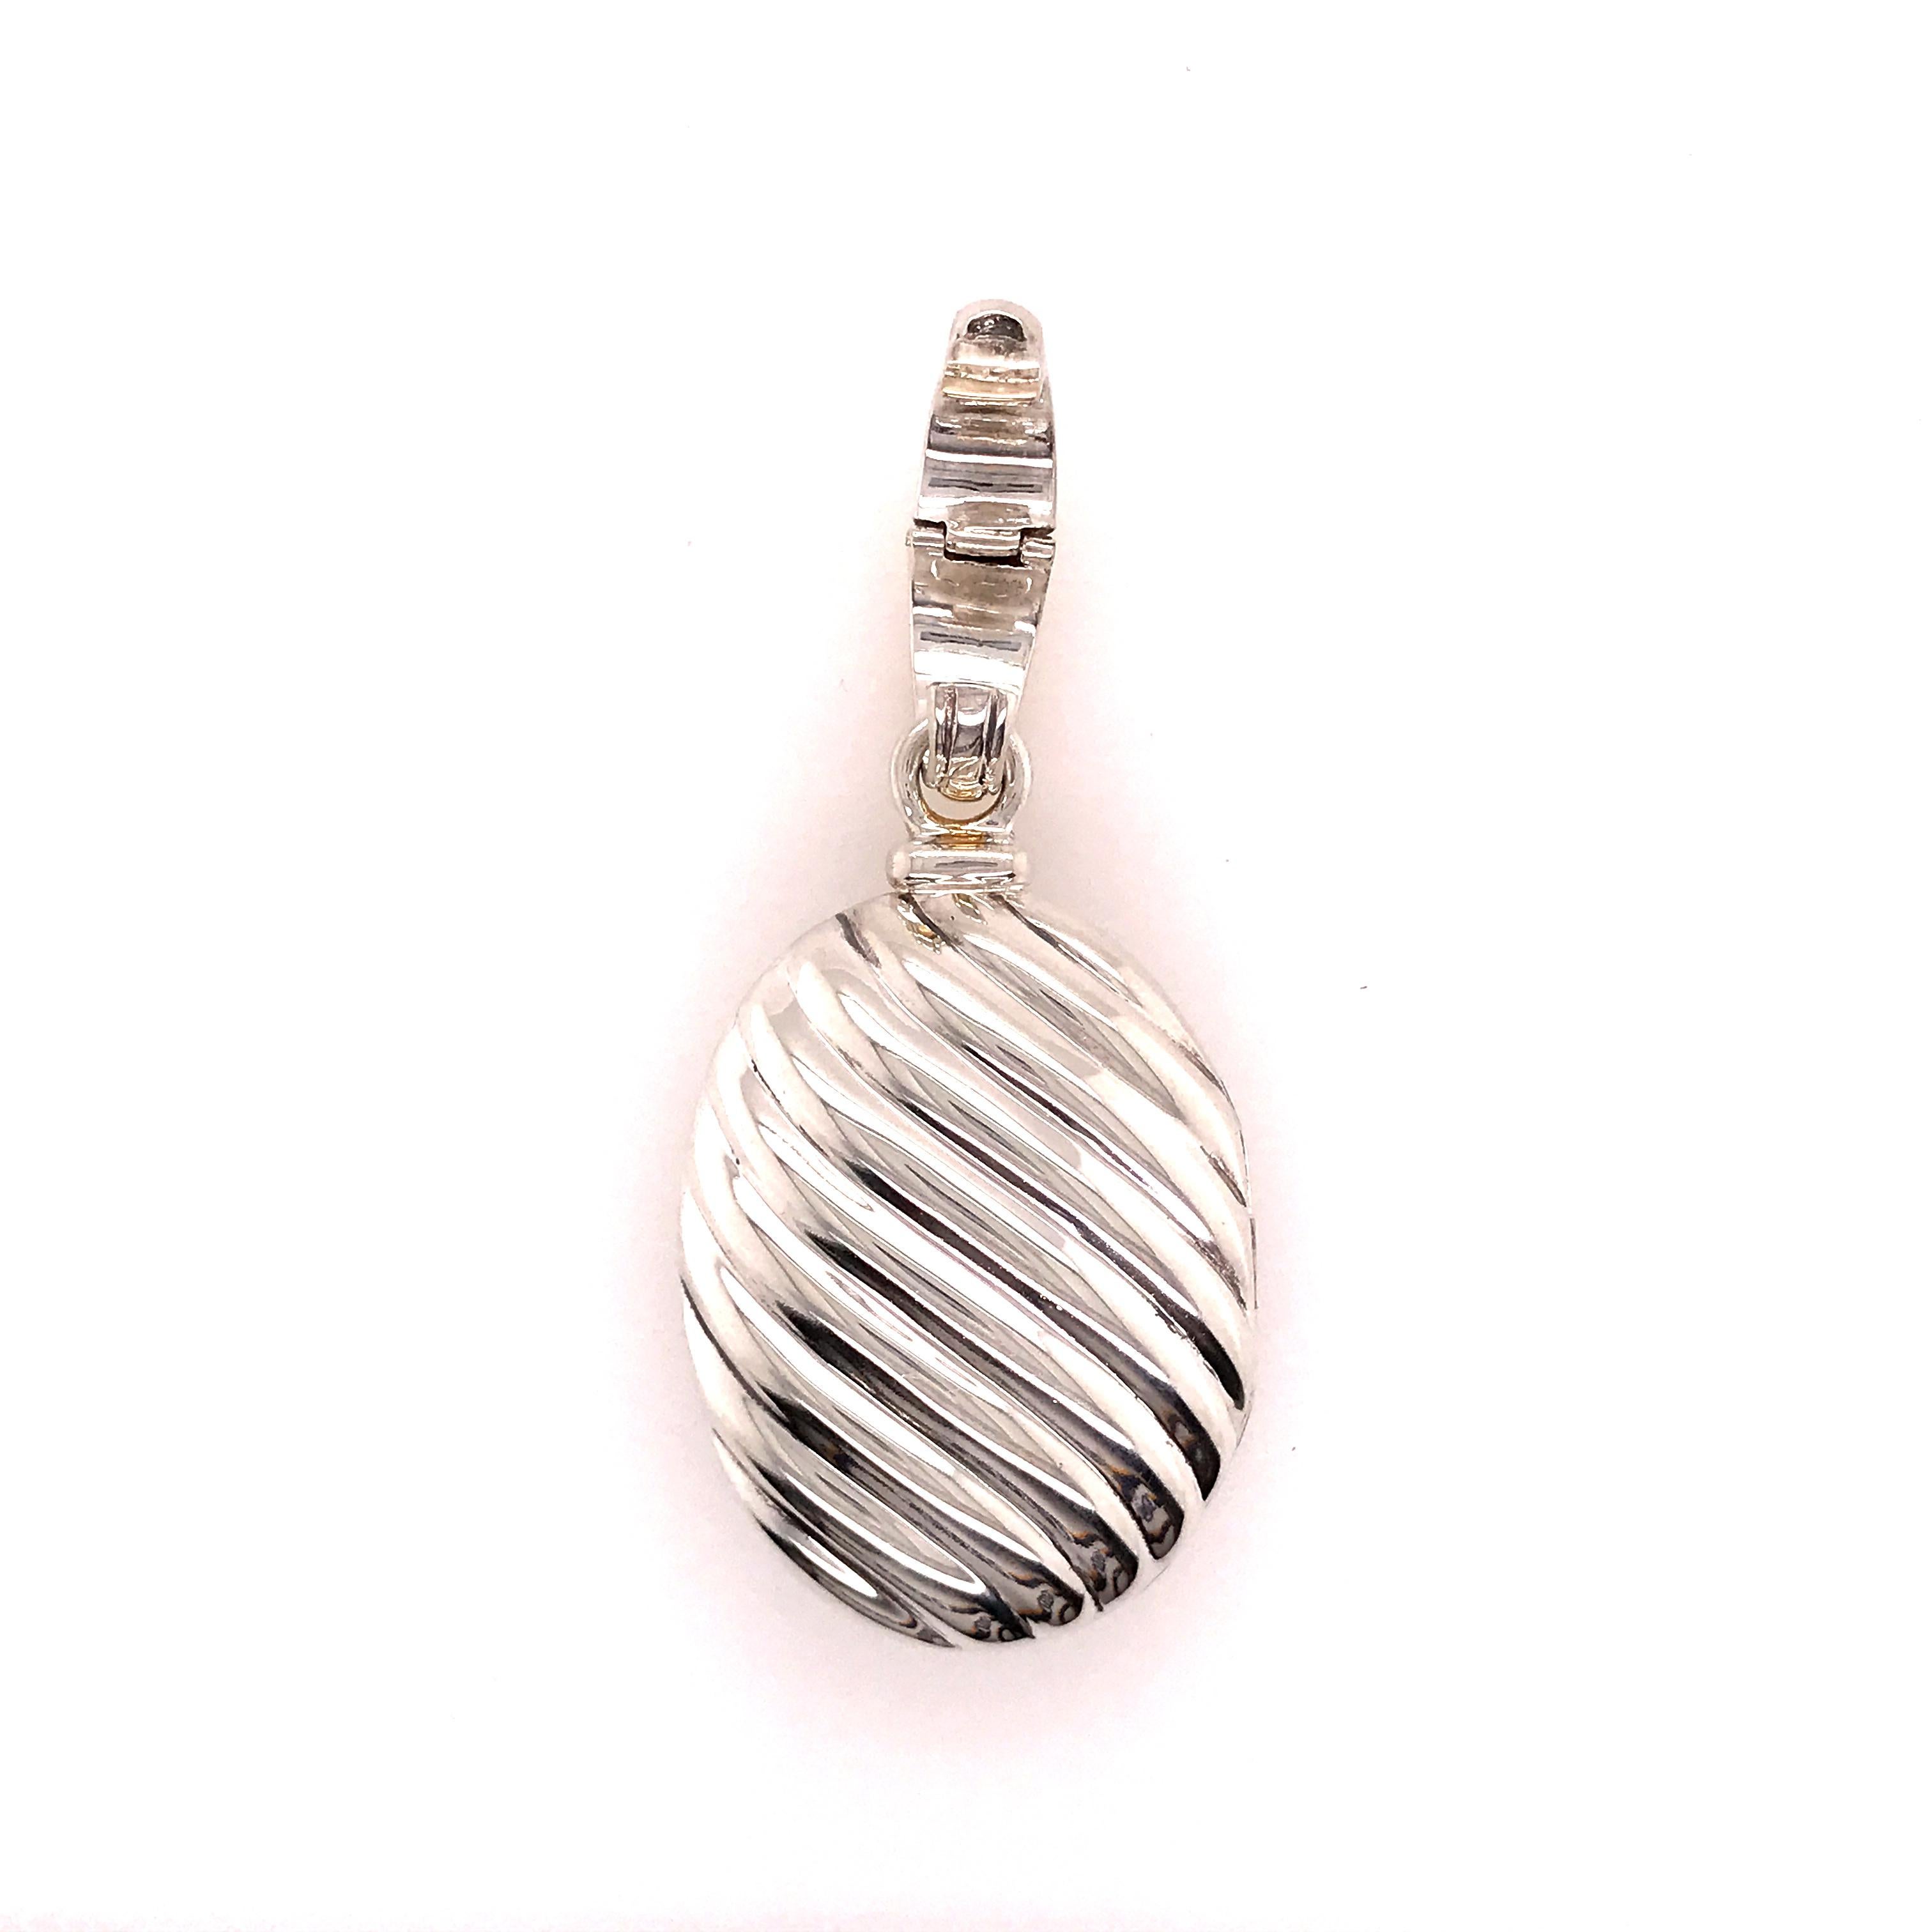 David Yurman Sculpted Cable Pendant Locket in 18K Yellow Gold and Sterling Silver.  The Pendant measures 2 1/2 inches in length, 1 1/8 inches in width and weighs 33.7 grams.  Signed 